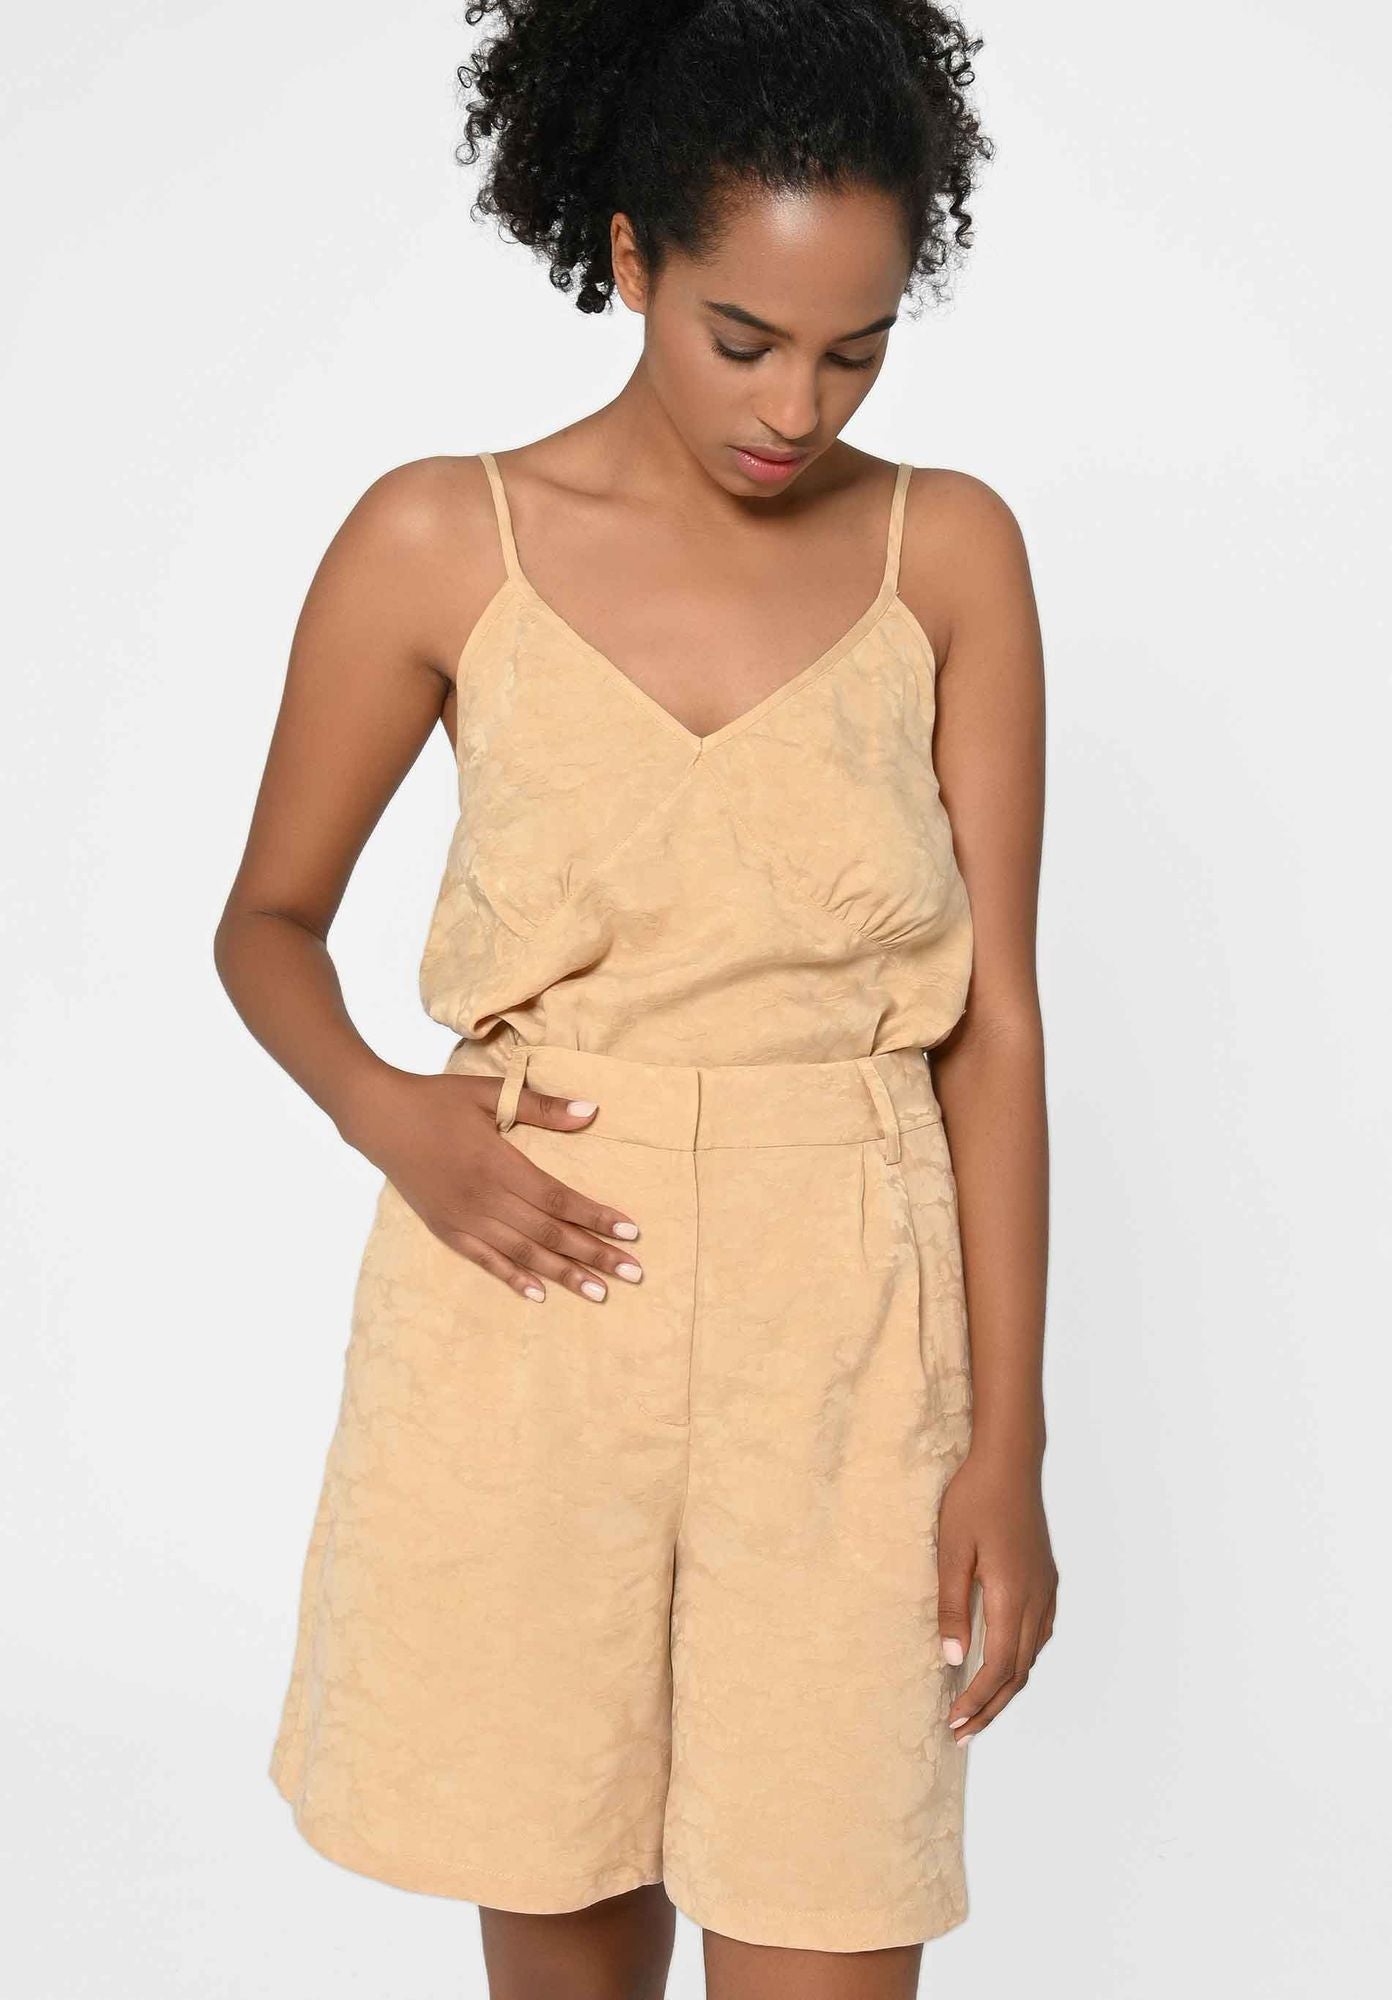 Shorts CABANAA in brown sugar by LOVJOI made from TENCEL™